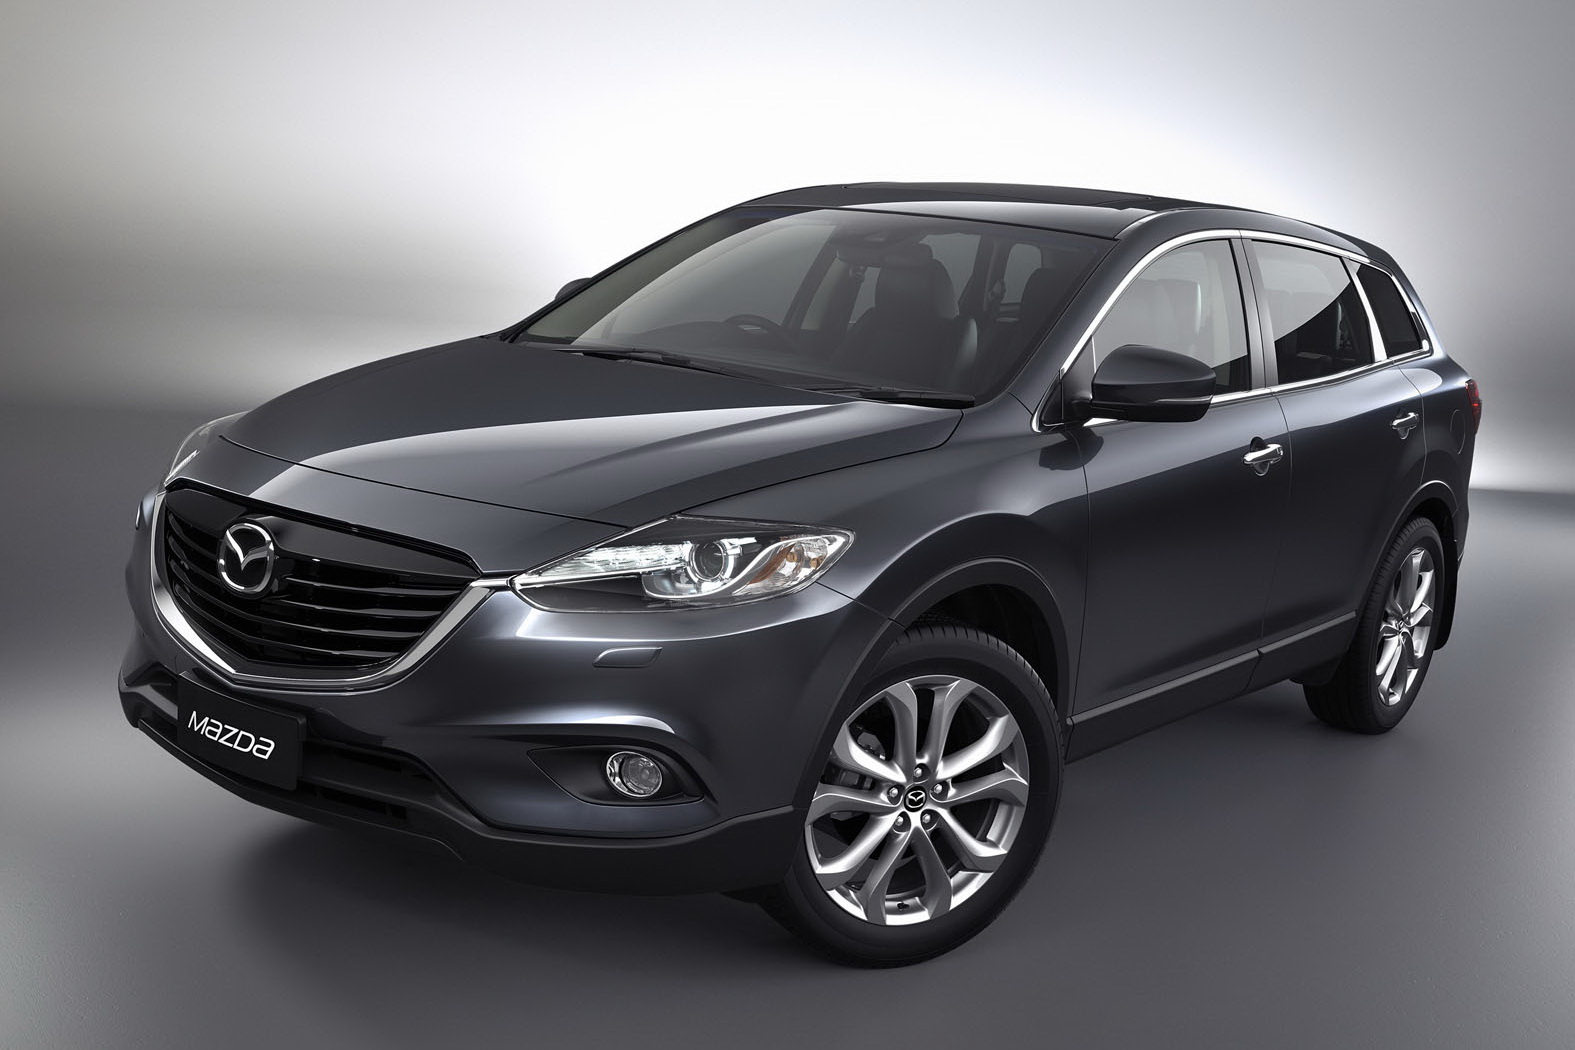 The new 2013 Mazda CX-9 facelift will make its debut at the Australian